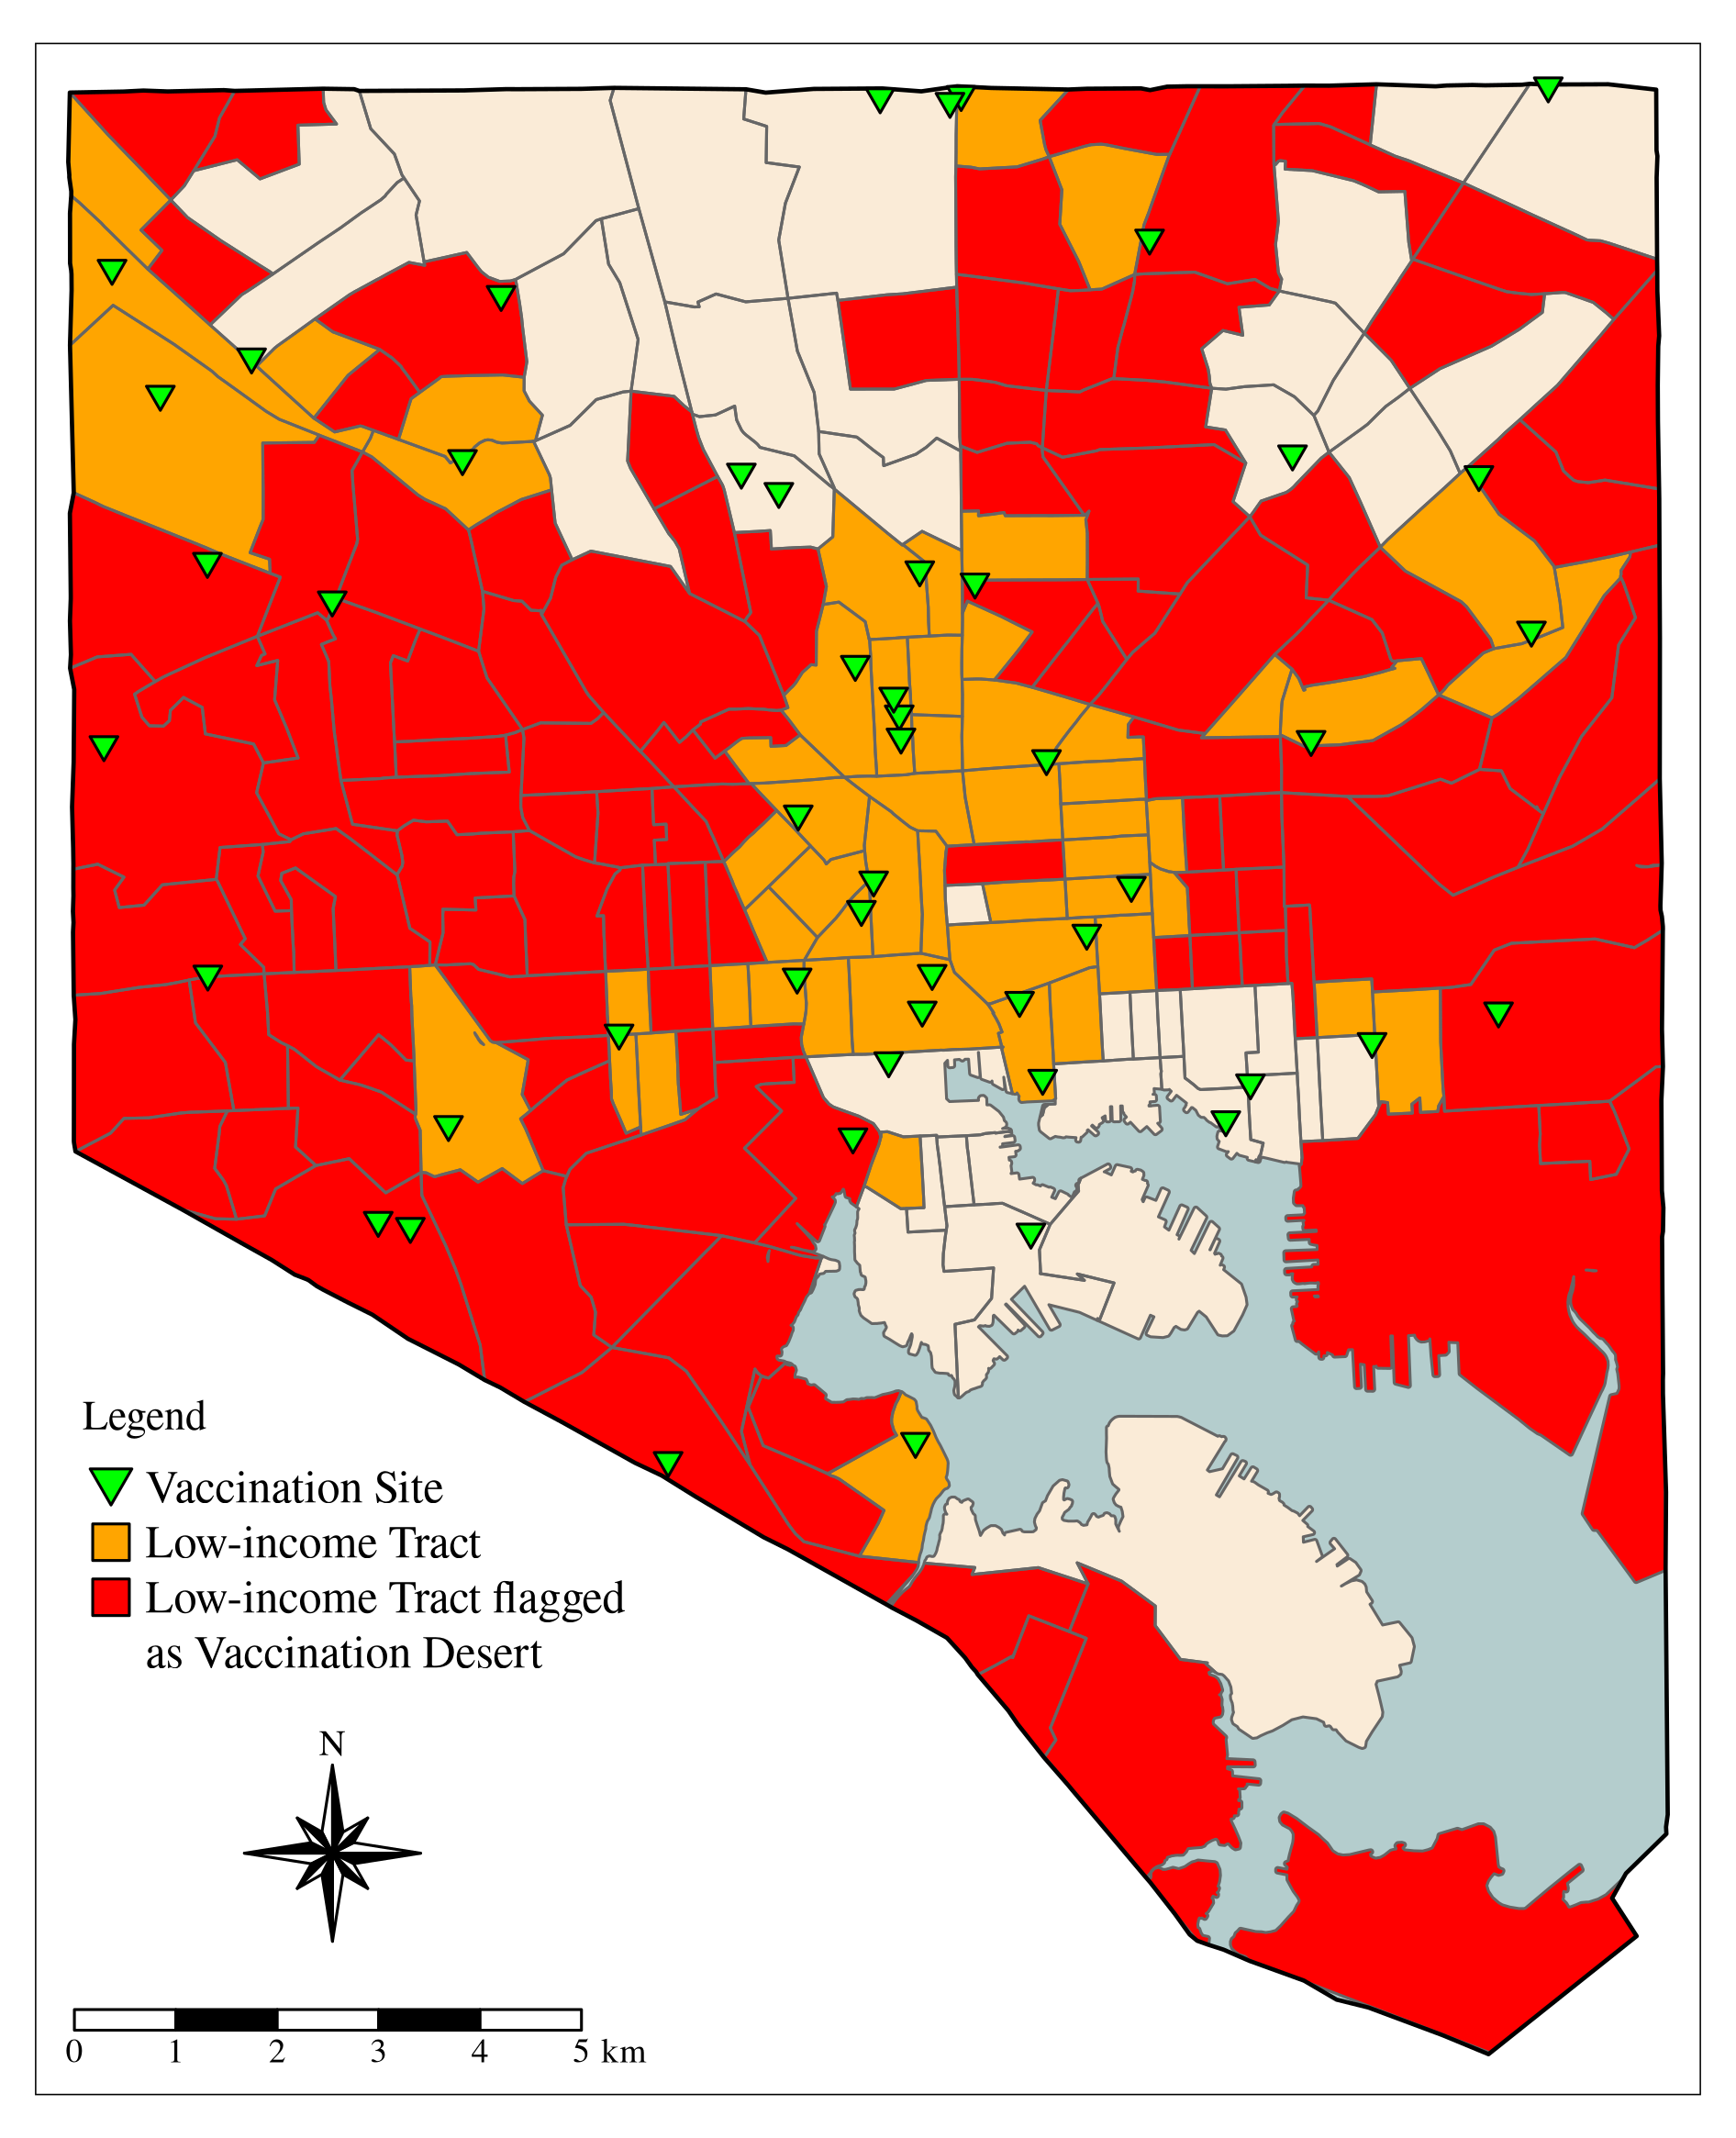 A map of Baltimore City that shows low-income areas and vaccination deserts